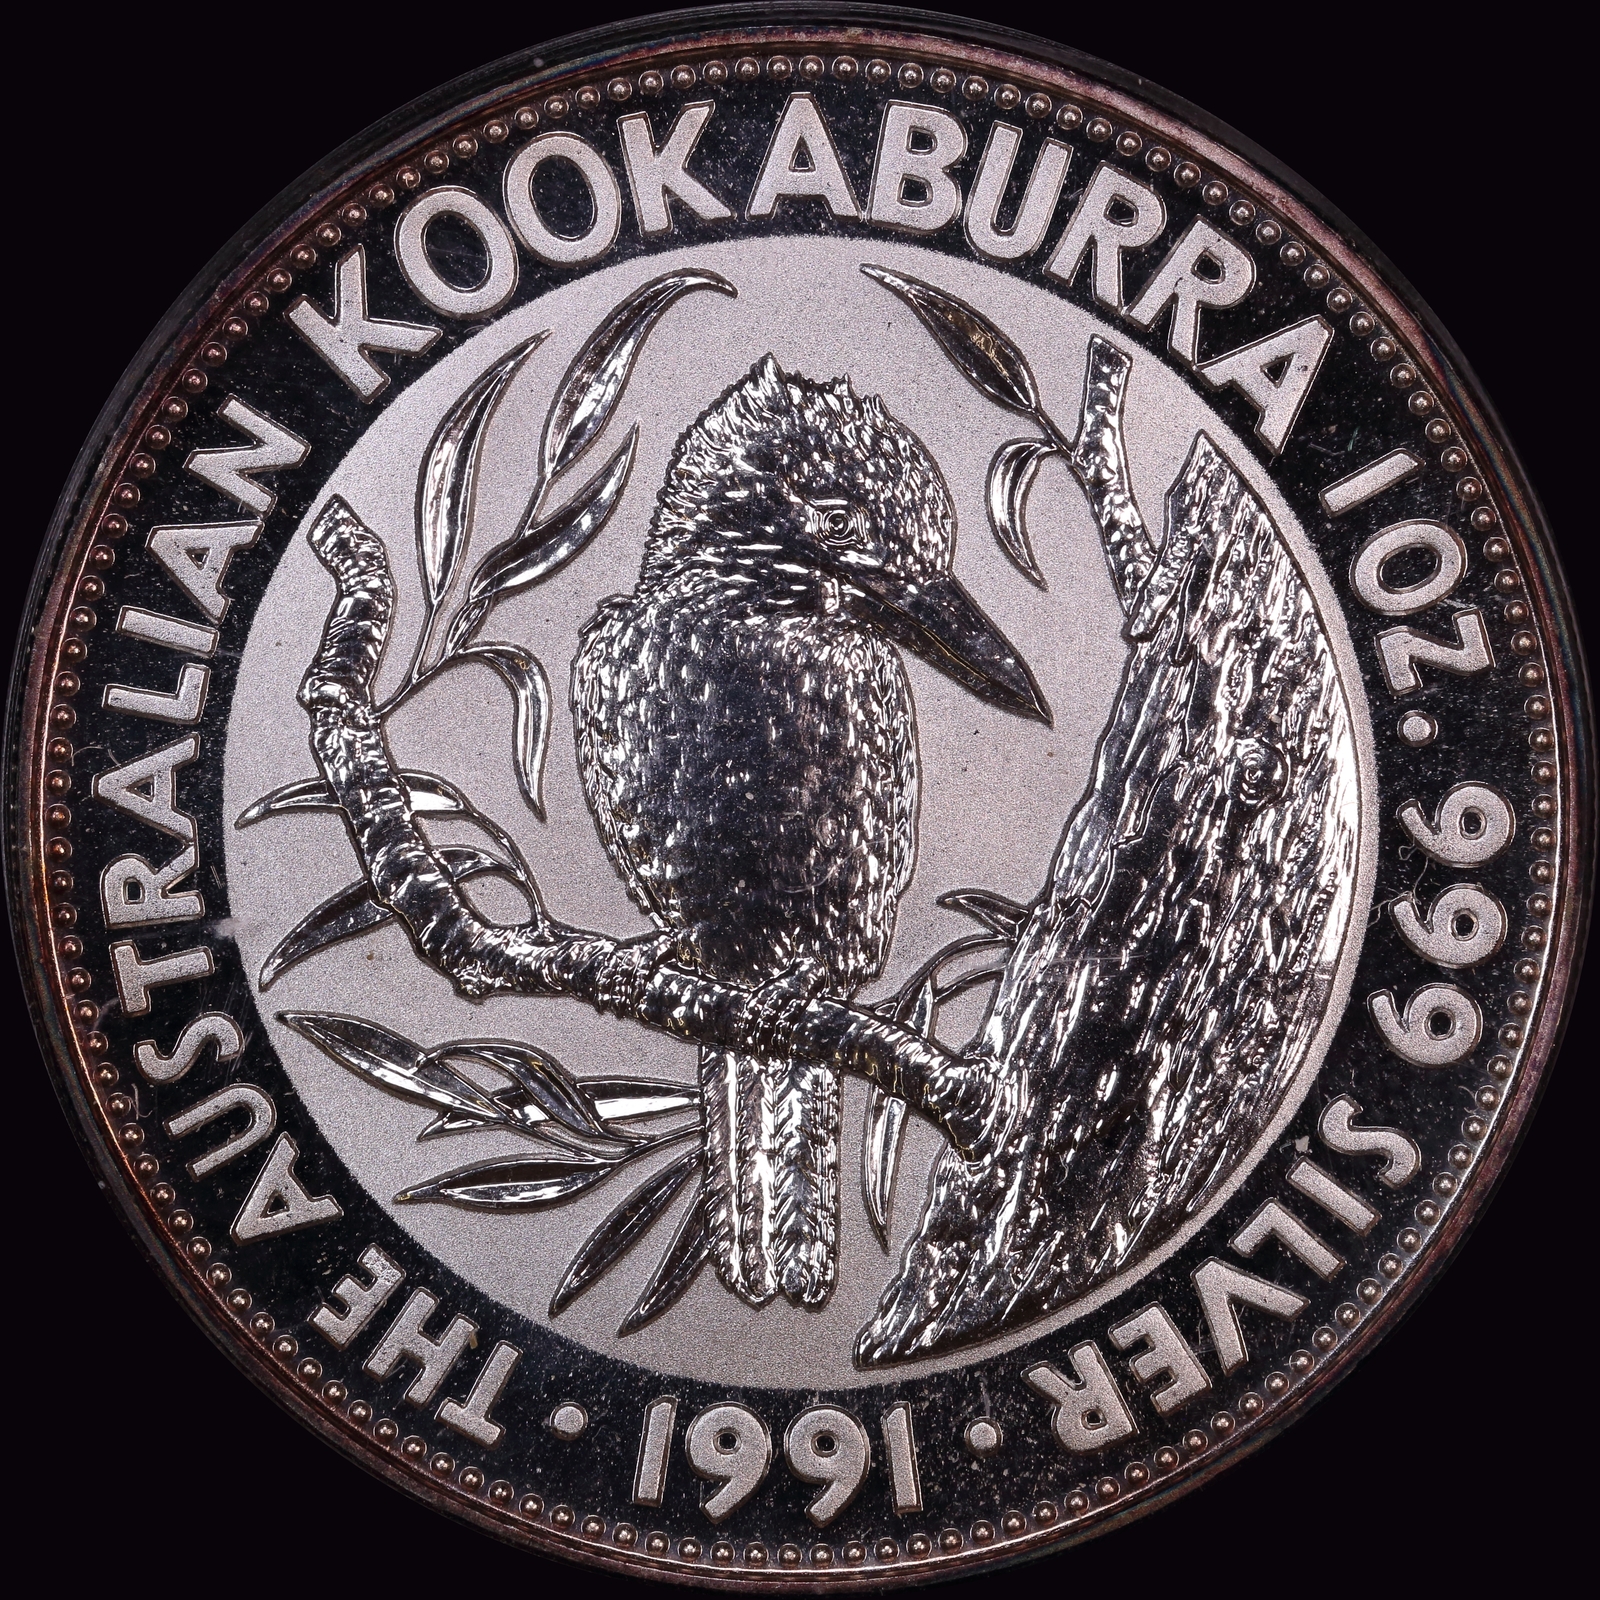 1991 Silver One Ounce Unc Kookaburra Coin product image